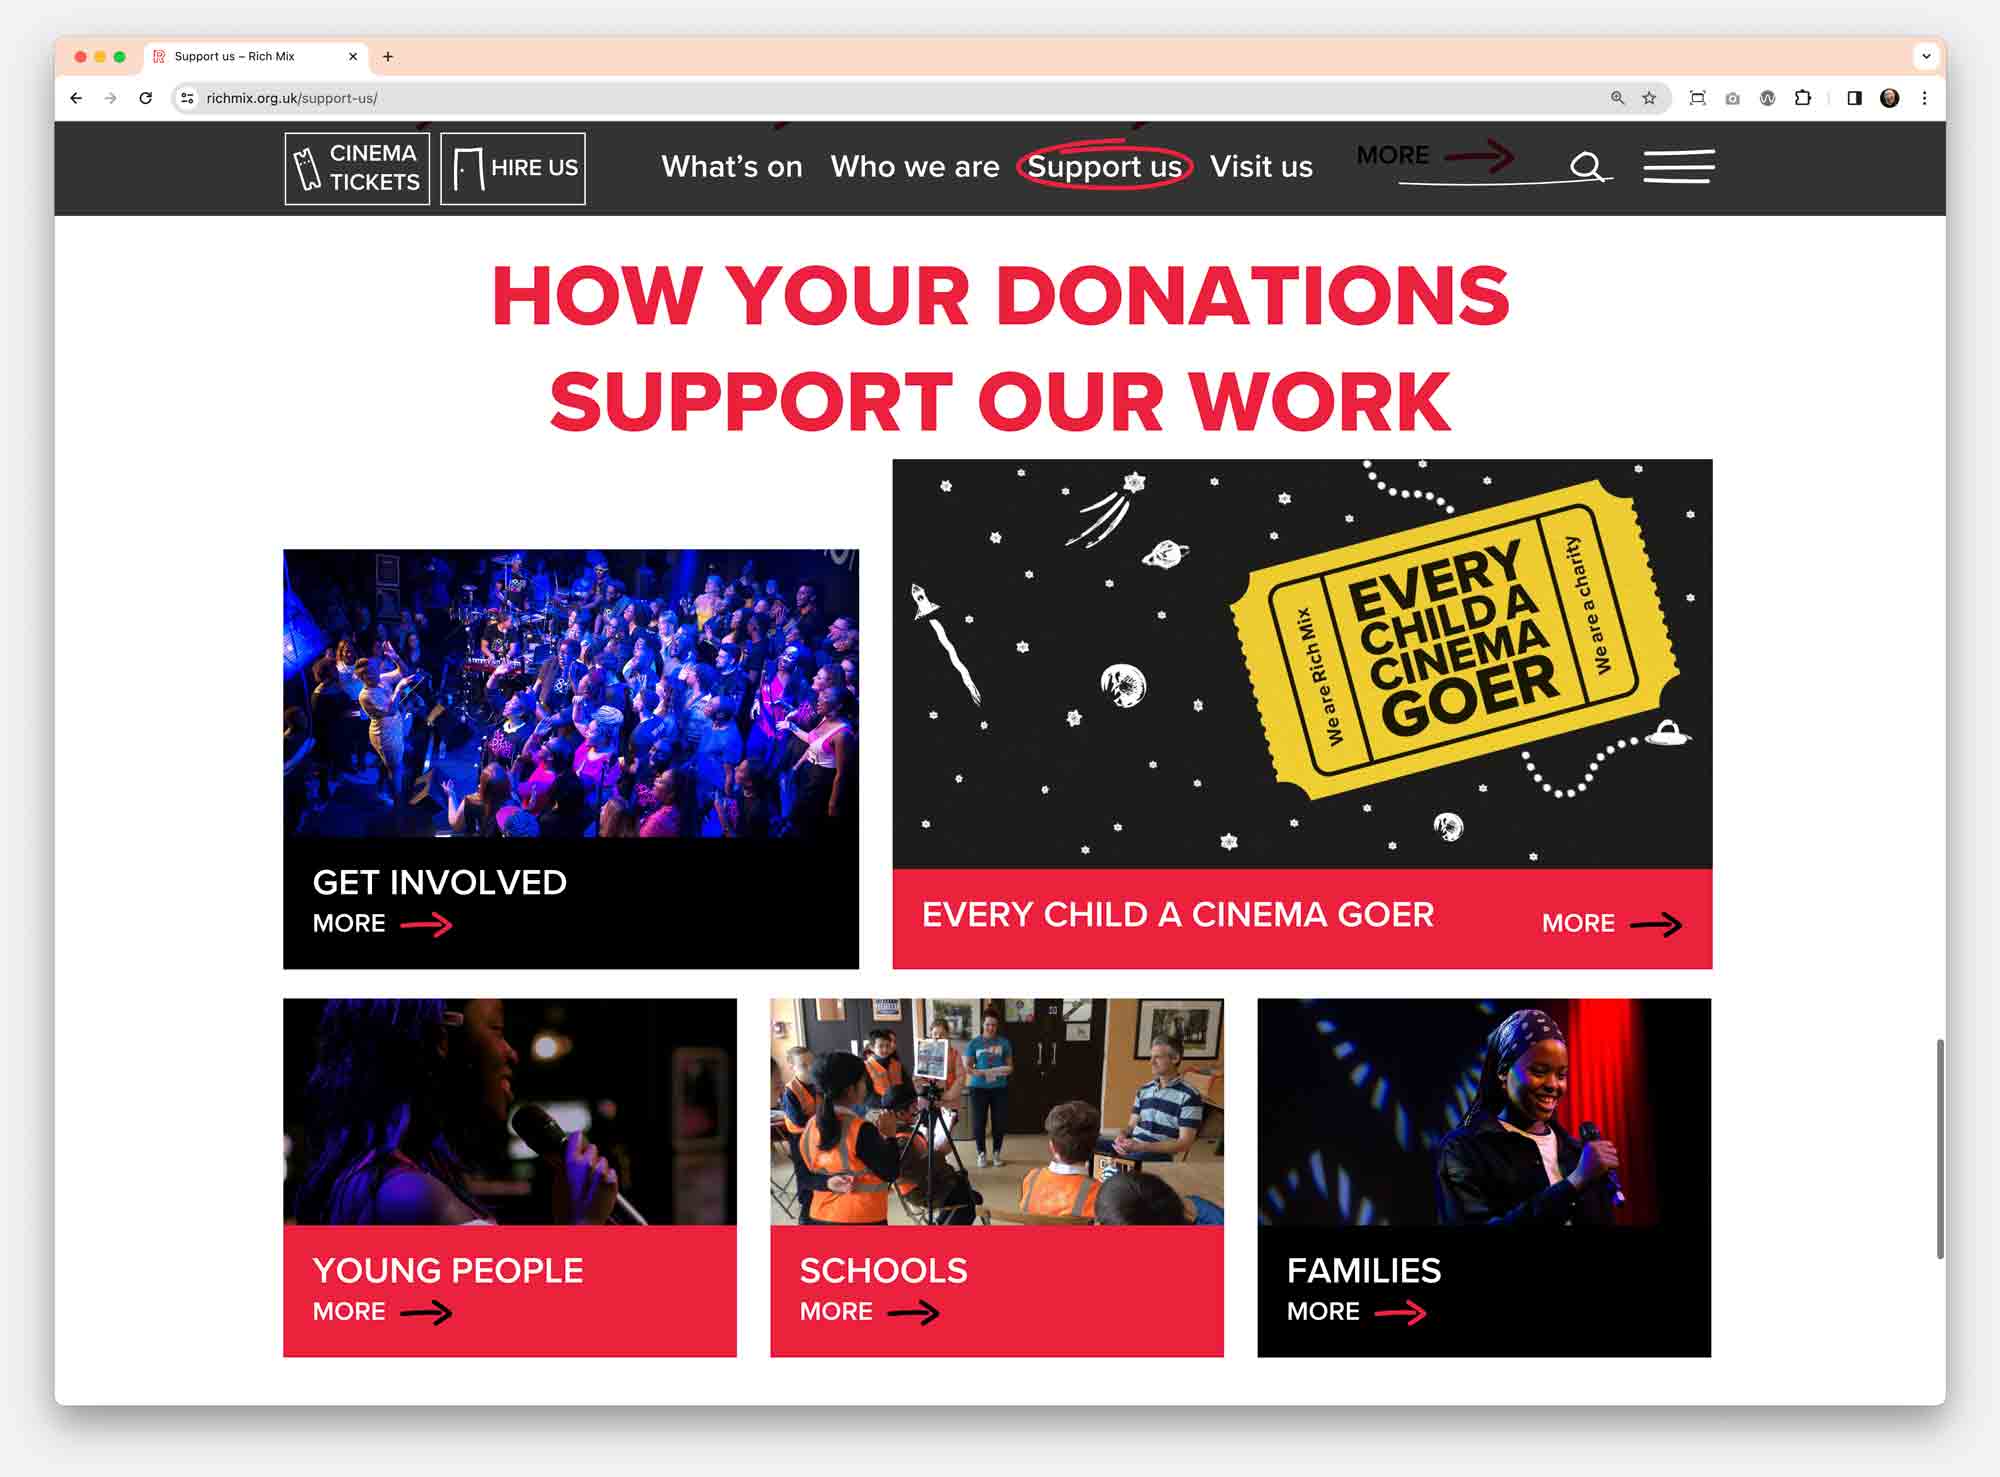 Rich Mix werbsite donation page, featuriung a grid of giving options.